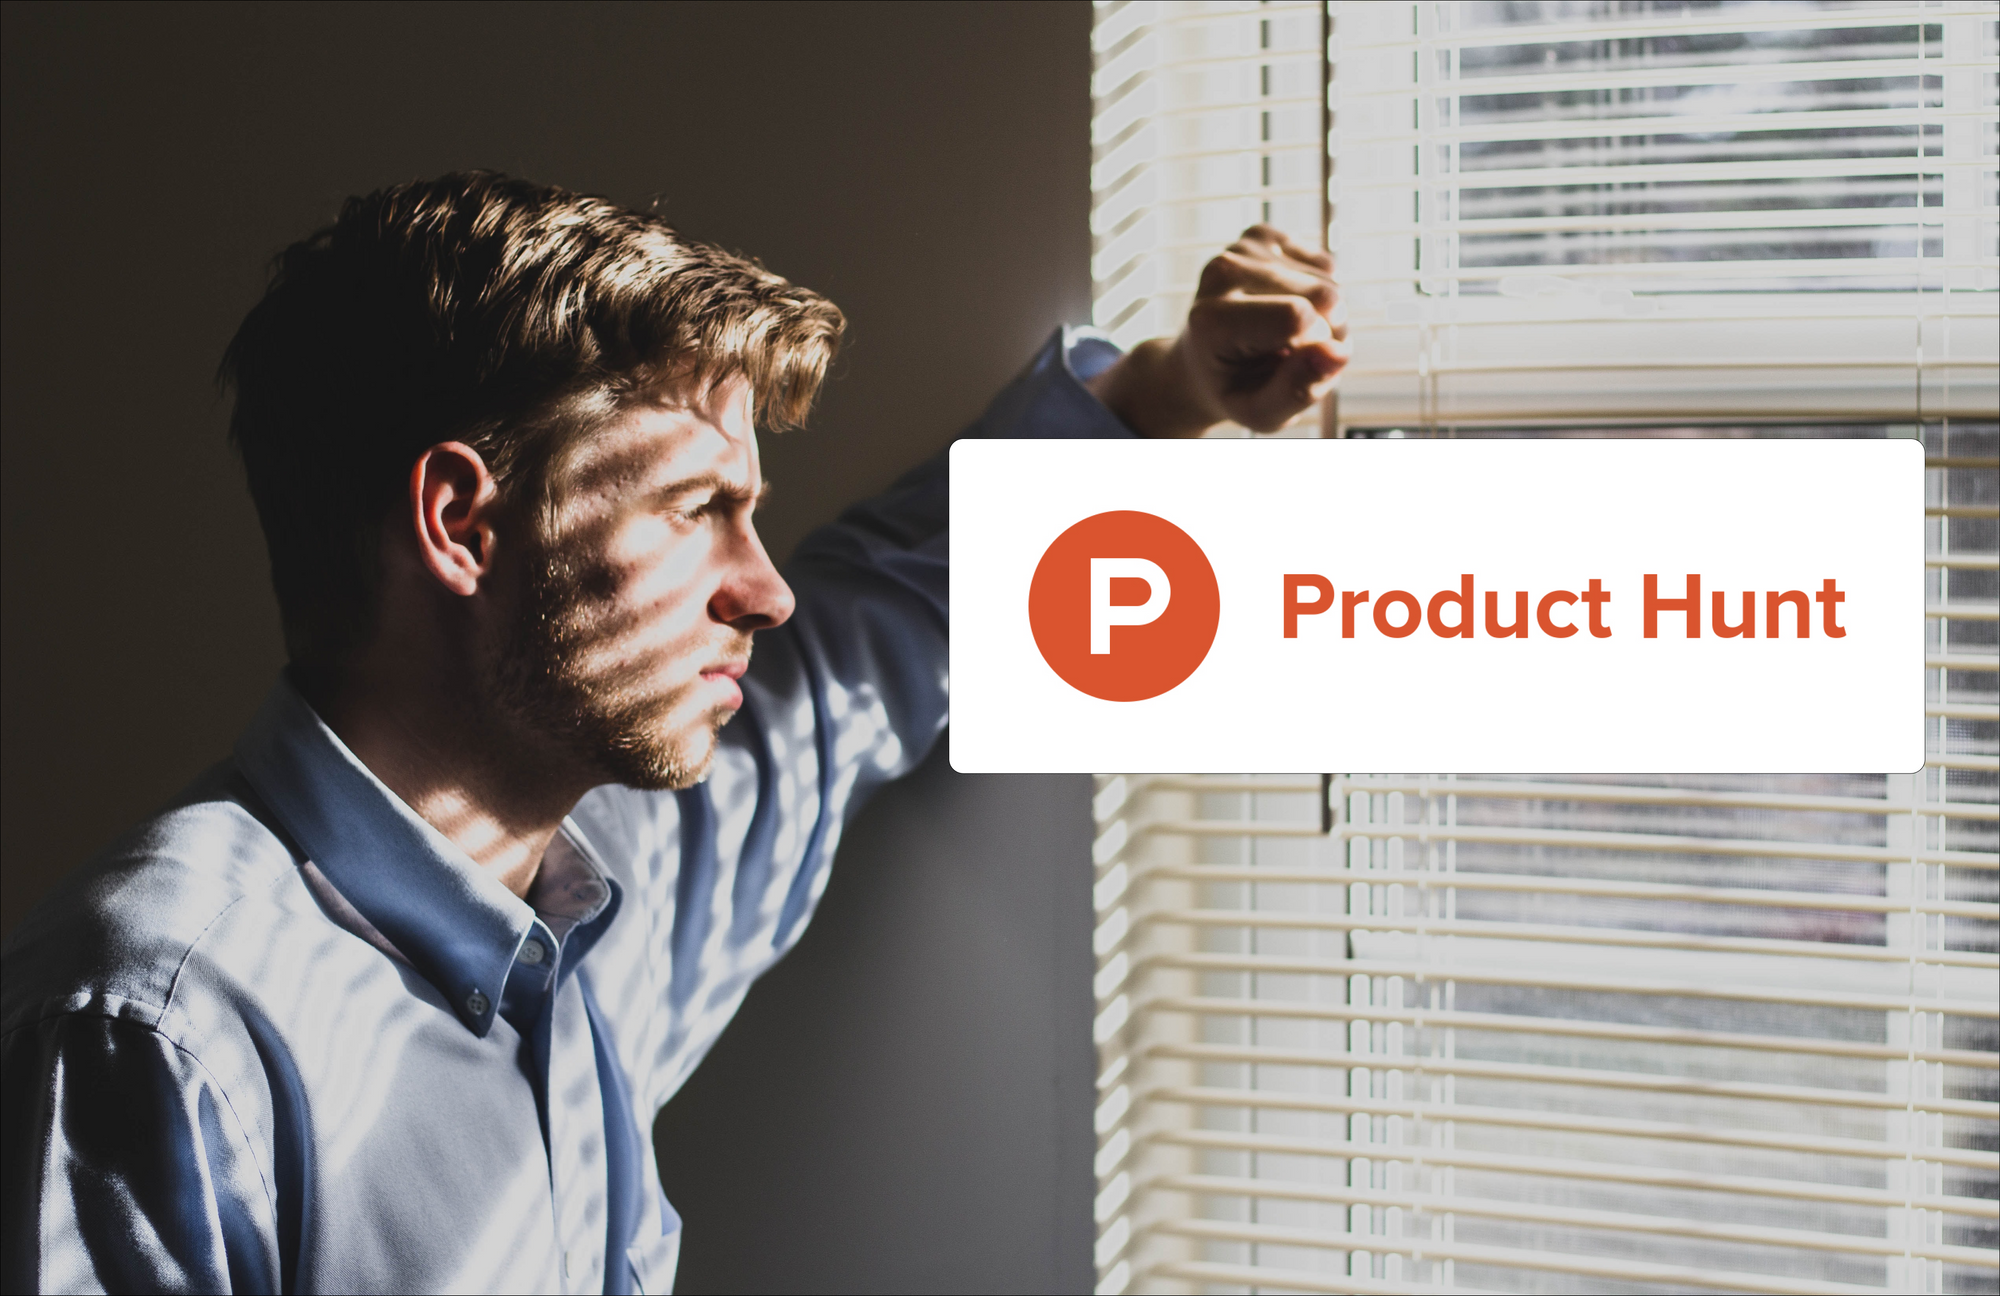 Indie Maker Sent to Rehab for Product Hunt Launch Addiction